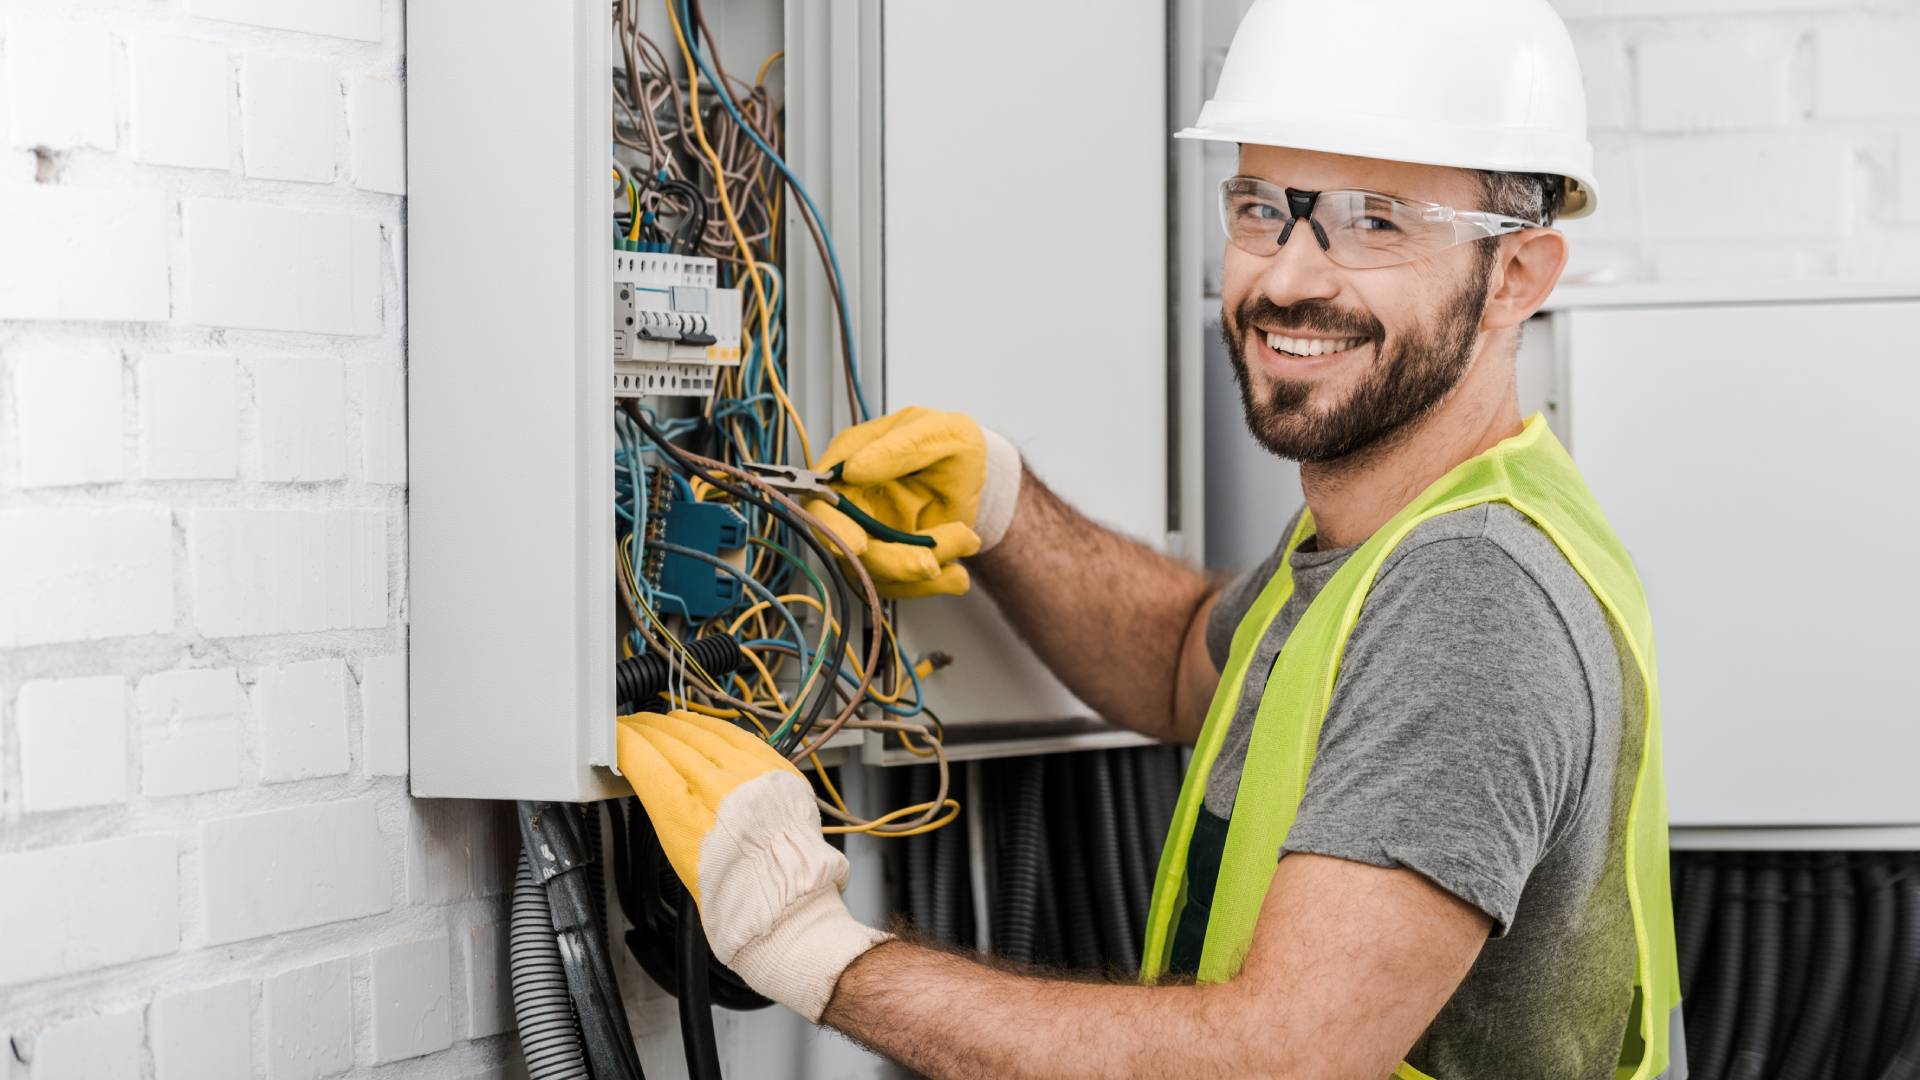 A handsome electrician smiling at the camera as he repairs an electrical box with pliers in a corridor.